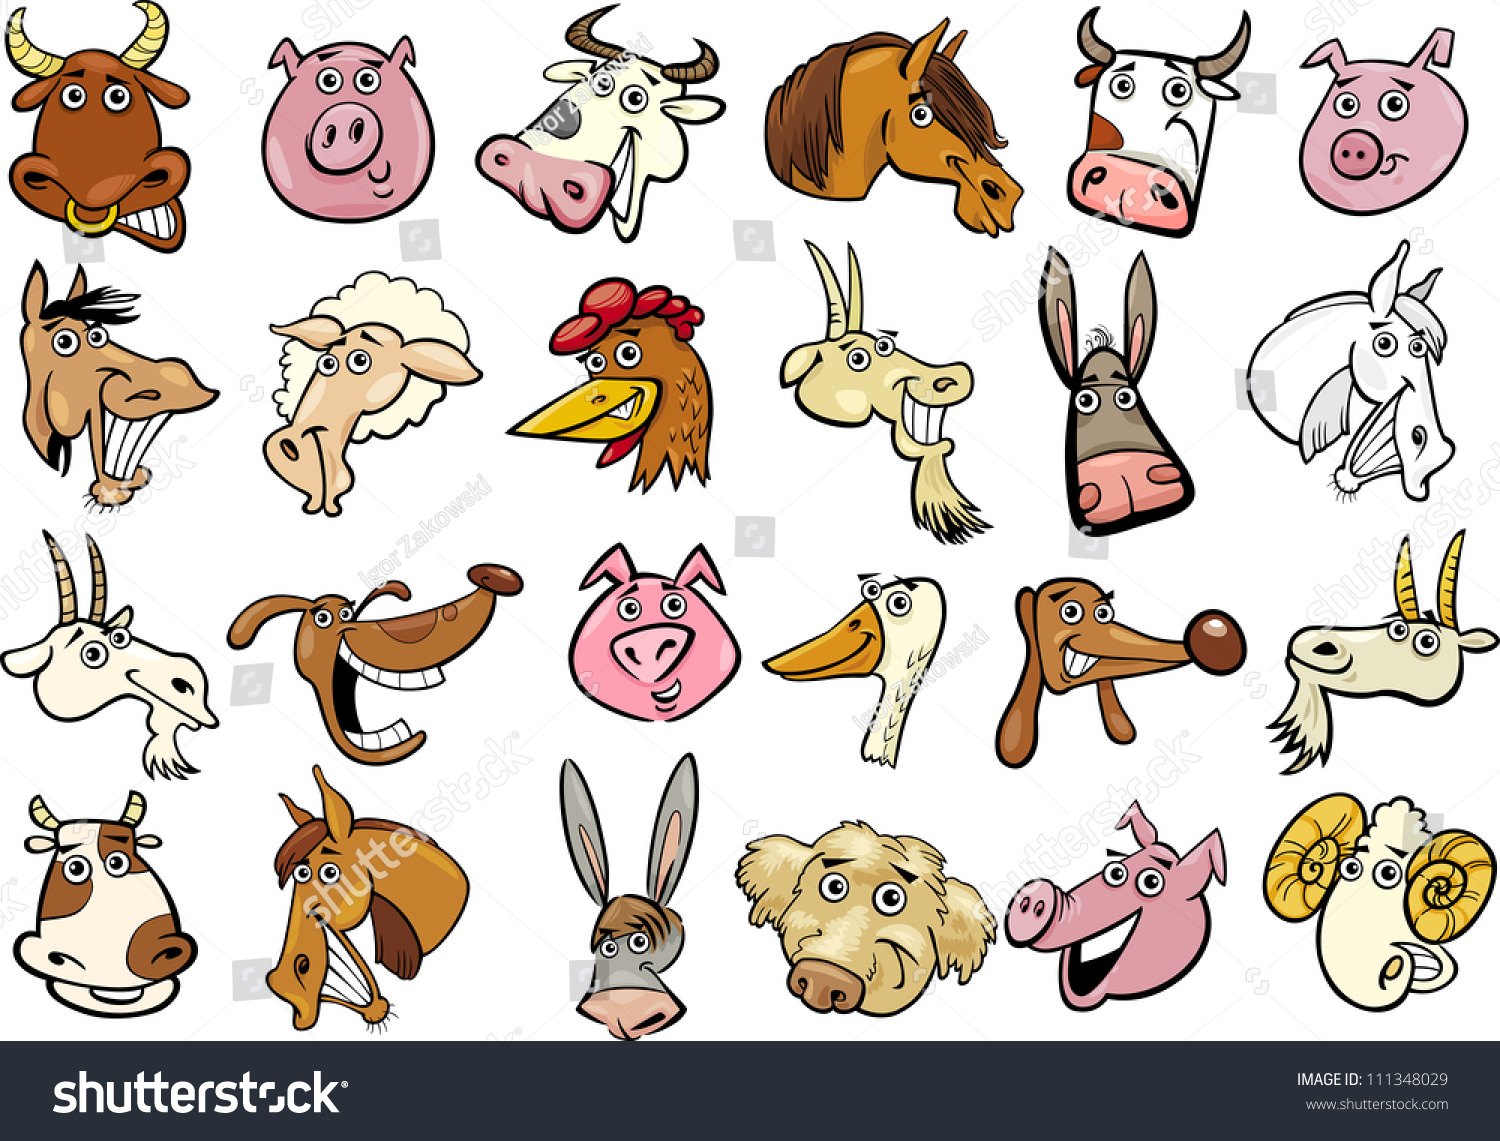 clipart of different animals - photo #20